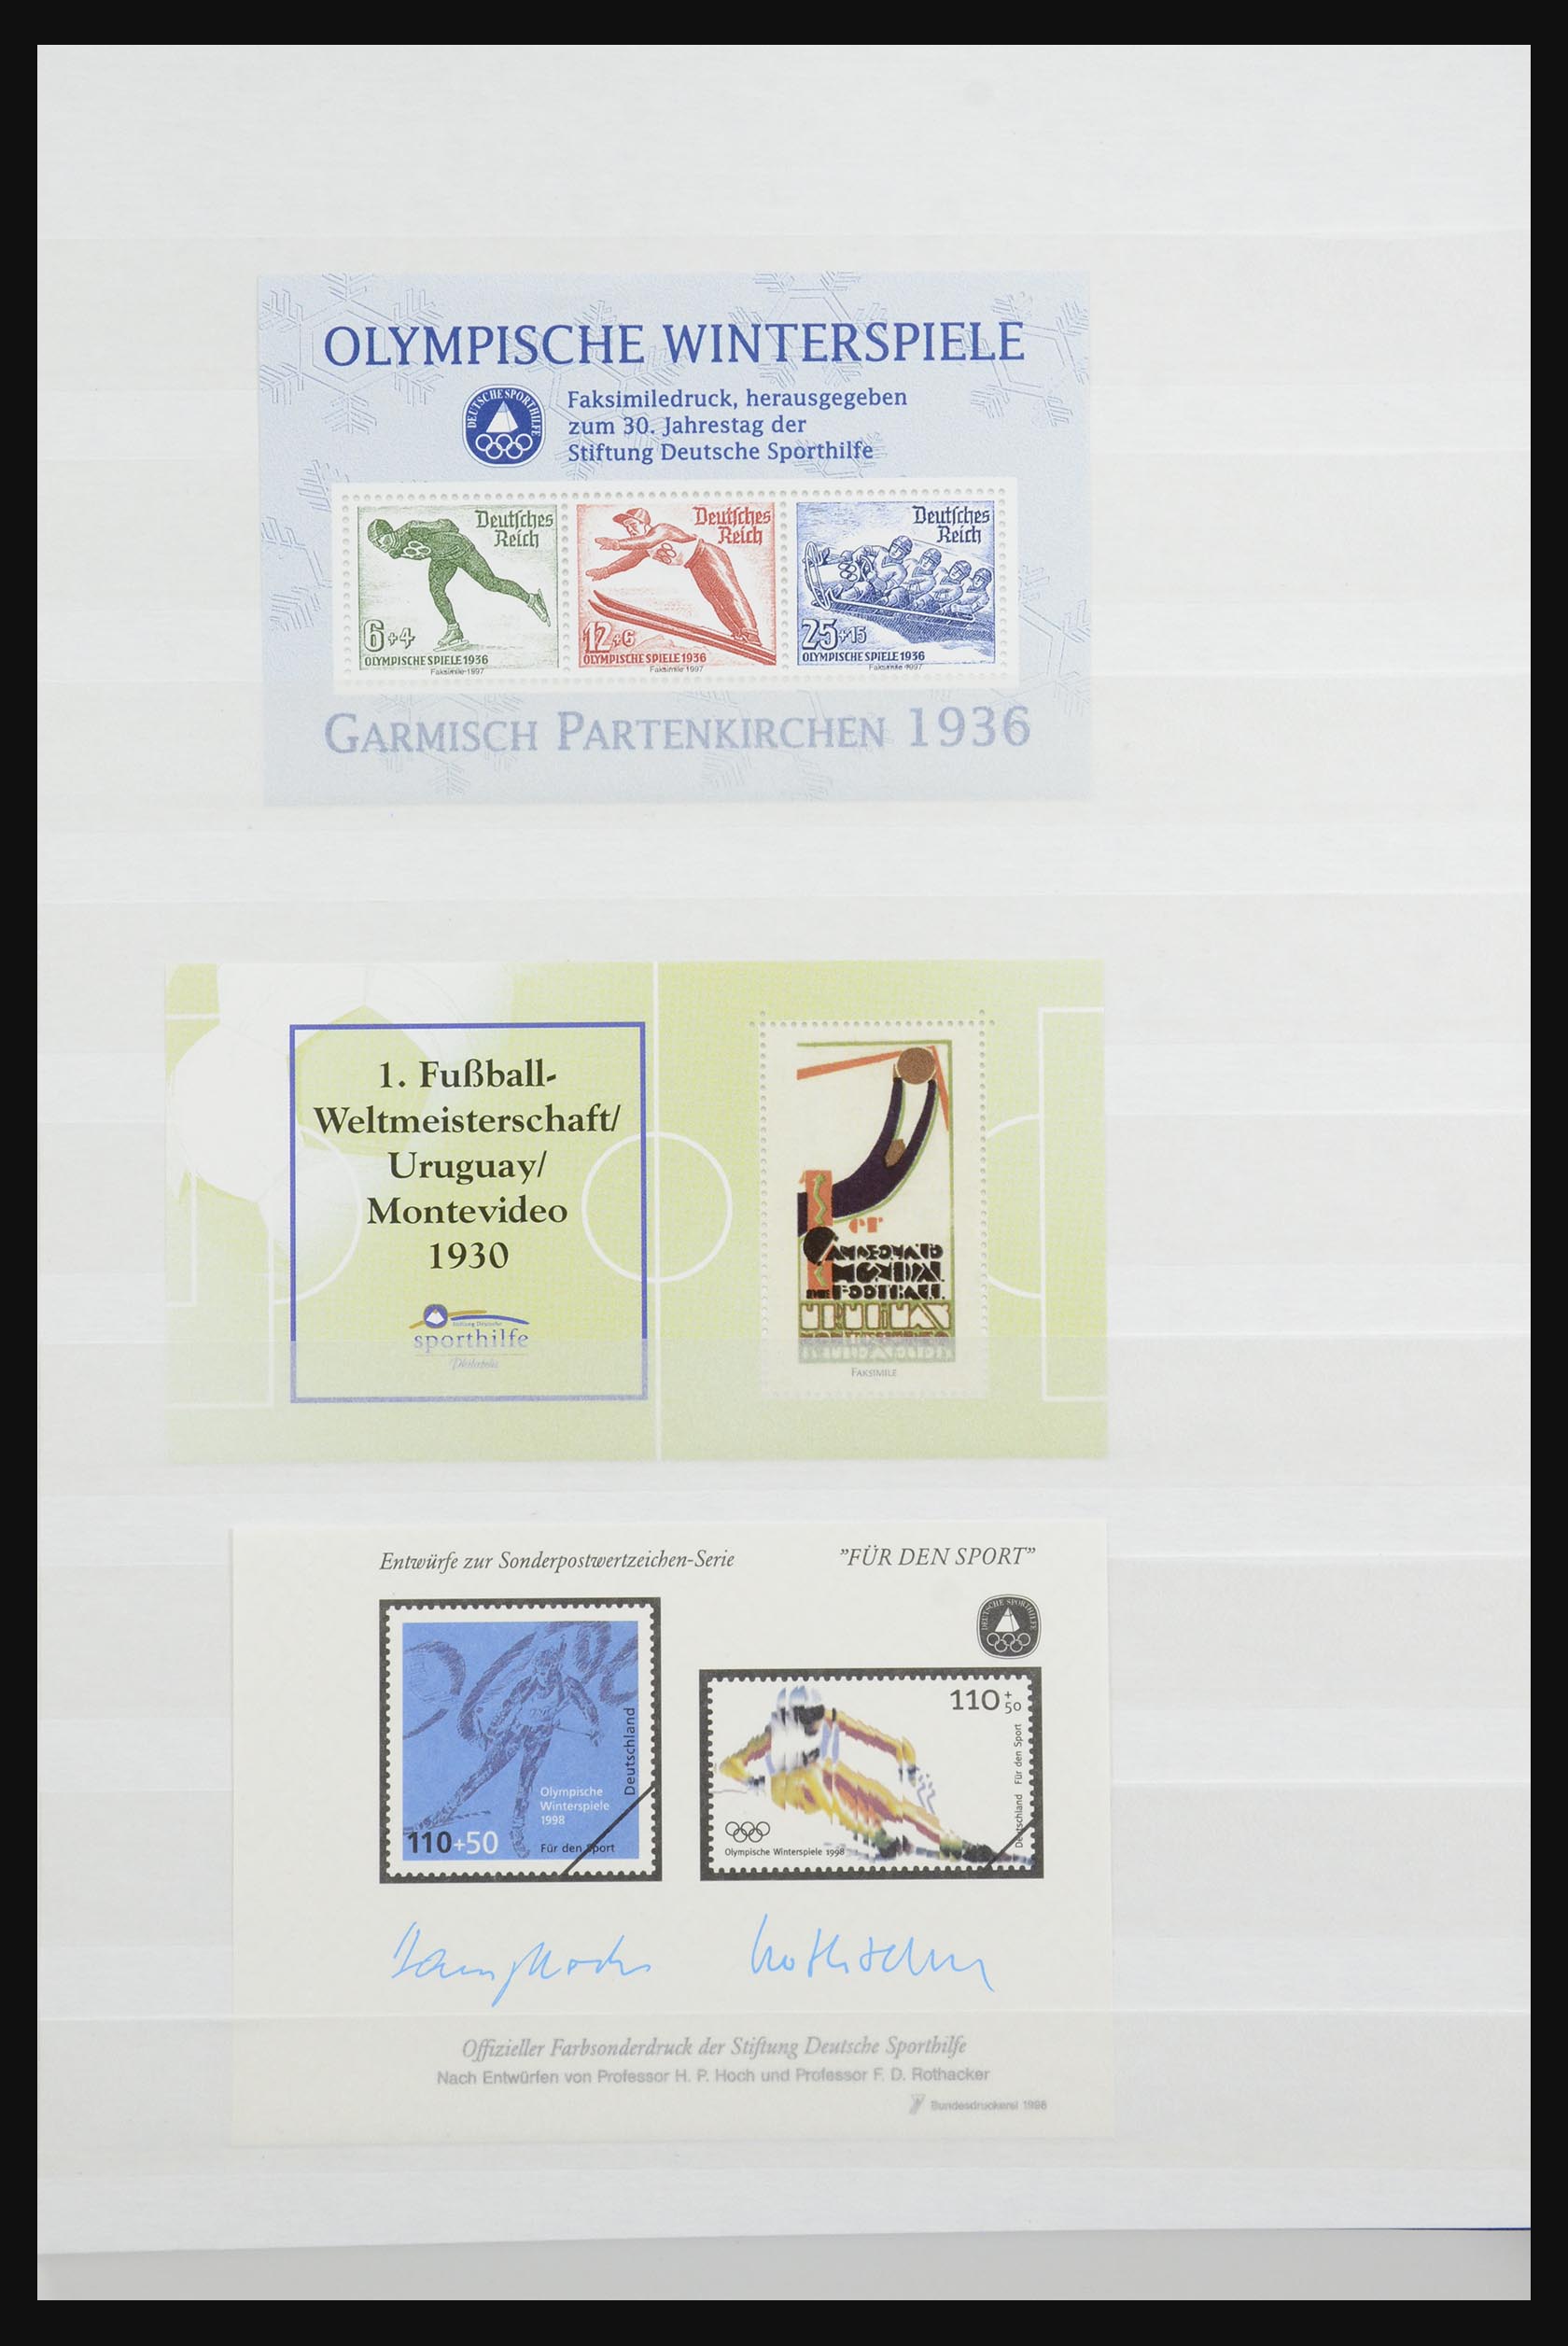 32050 030 - 32050 Bundespost special sheets 1980-2010.